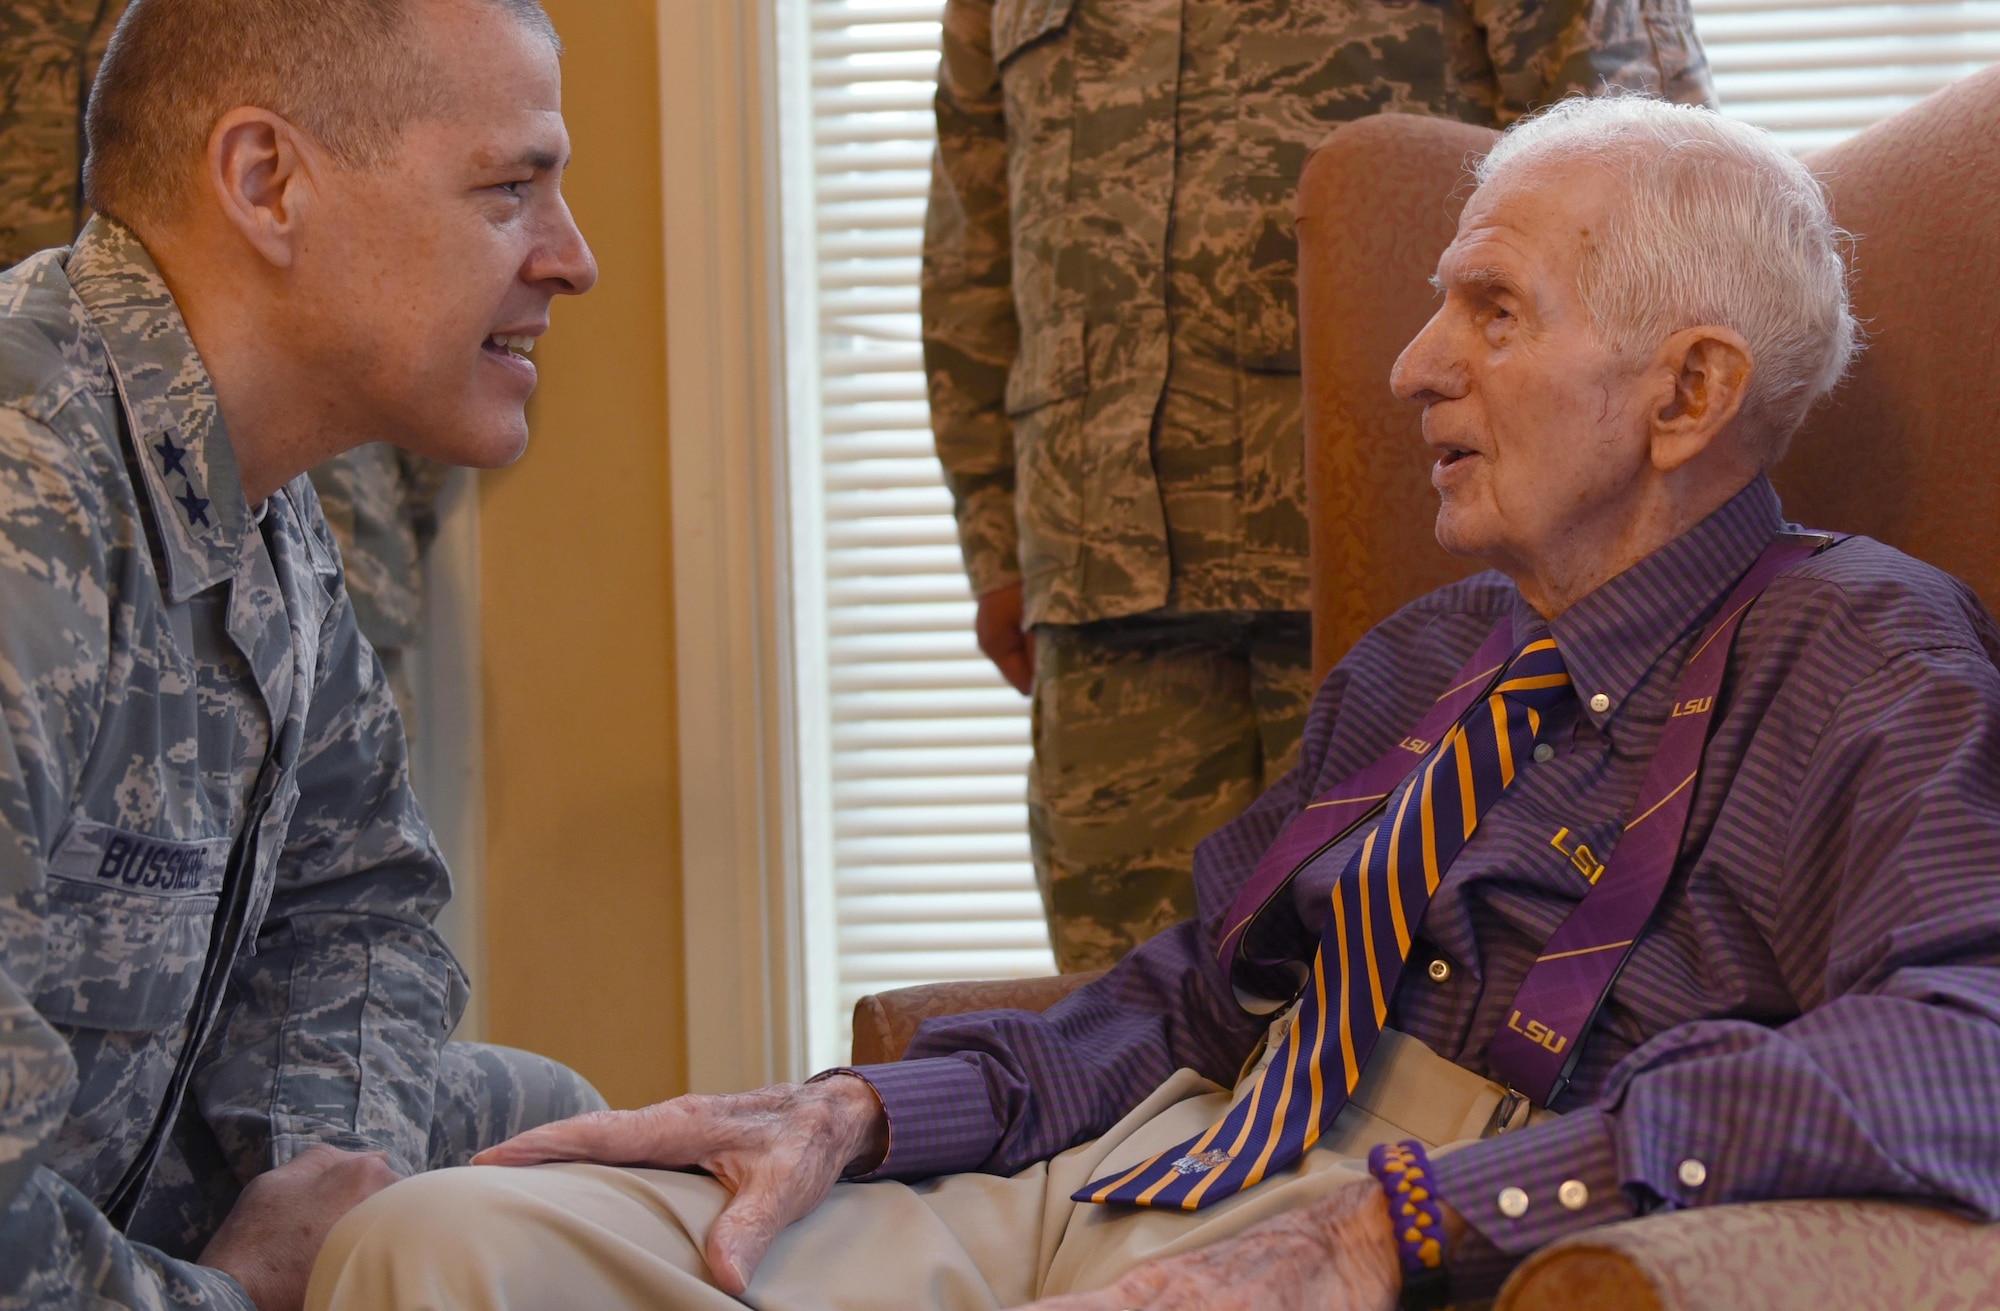 U.S. Air Force Maj. Gen. Thomas Bussiere, 8th Air Force commander, speaks with 93-year-old World War II veteran Raymond Odom during Odom’s dog tag presentation at Arbor Rose Assisted Living Facility in Farmerville, La., Feb. 2, 2017. Odom was reunited with his lost dog tags during the 8th Air Force 75th Anniversary event after more than 70 years.  (U.S. Air Force photo by Senior Airman Erin Trower)